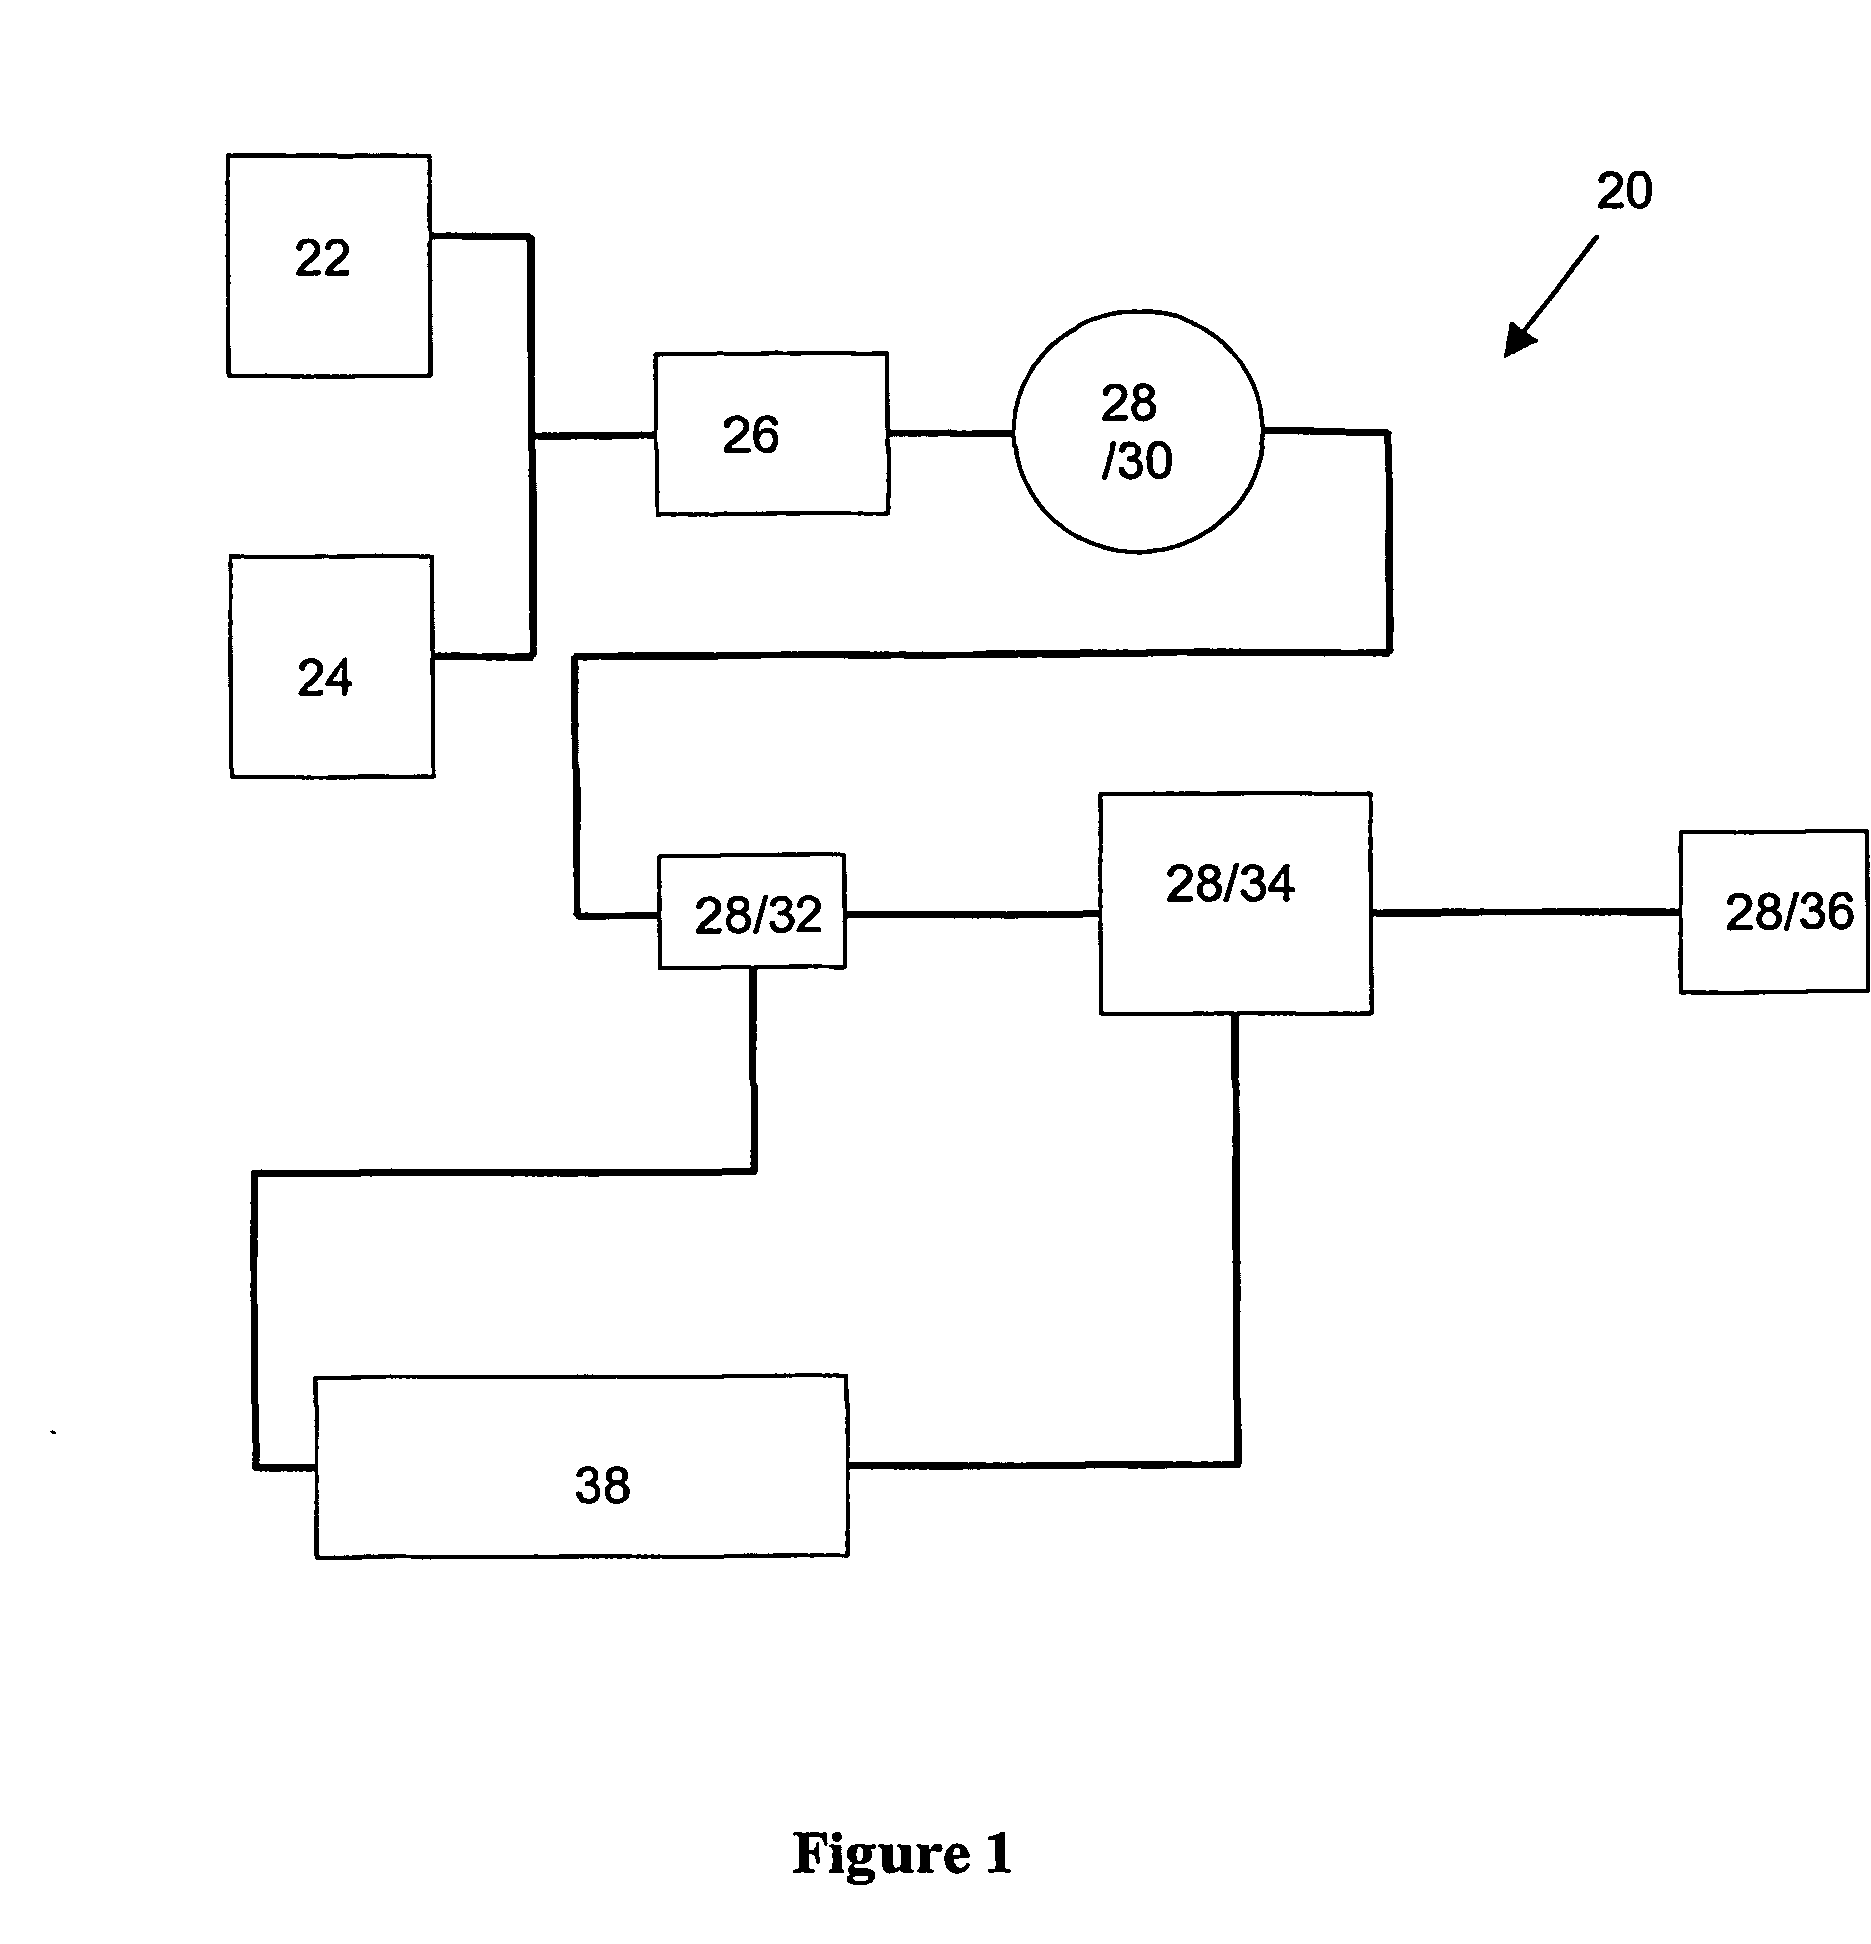 Method of characterizing a dispersion using transformation techniques